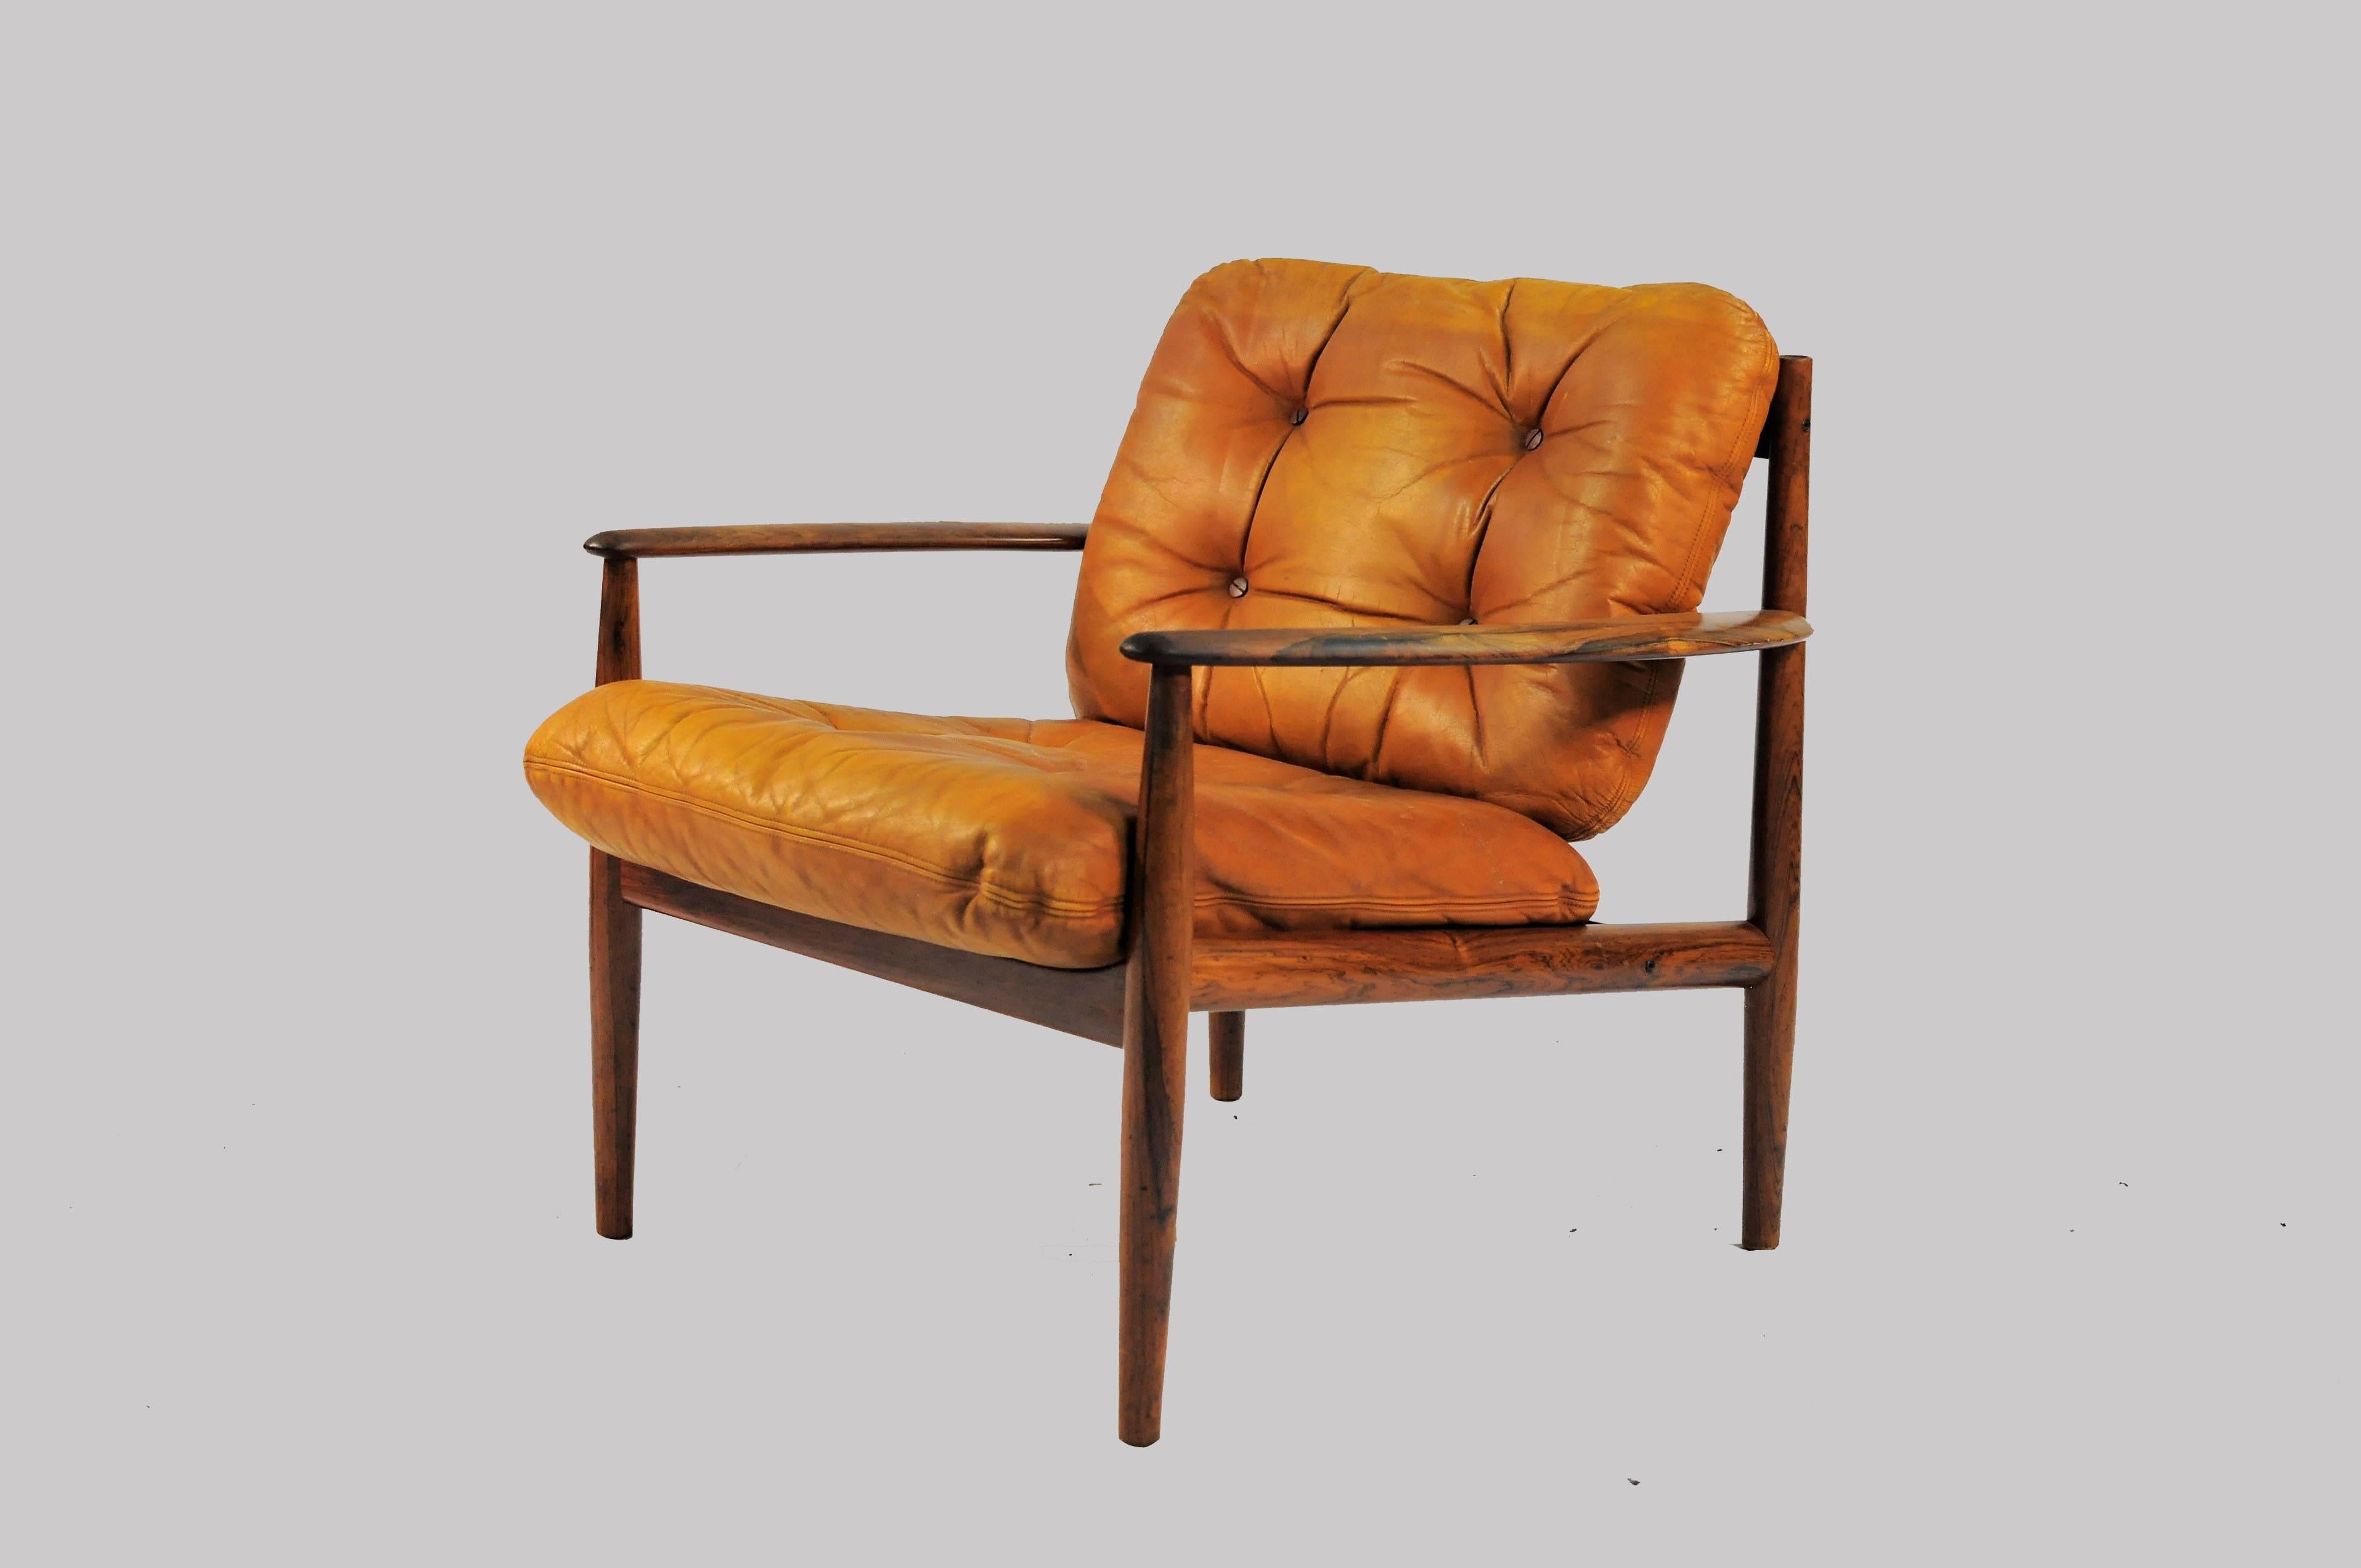 Two 1960s Grete Jalk lounge chairs in rosewood and original brown leather cushions produced by France & Søn.

The frames of the chairs have been overlooked and refinished by our cabinetmaker and are in very good condition. The  original leather